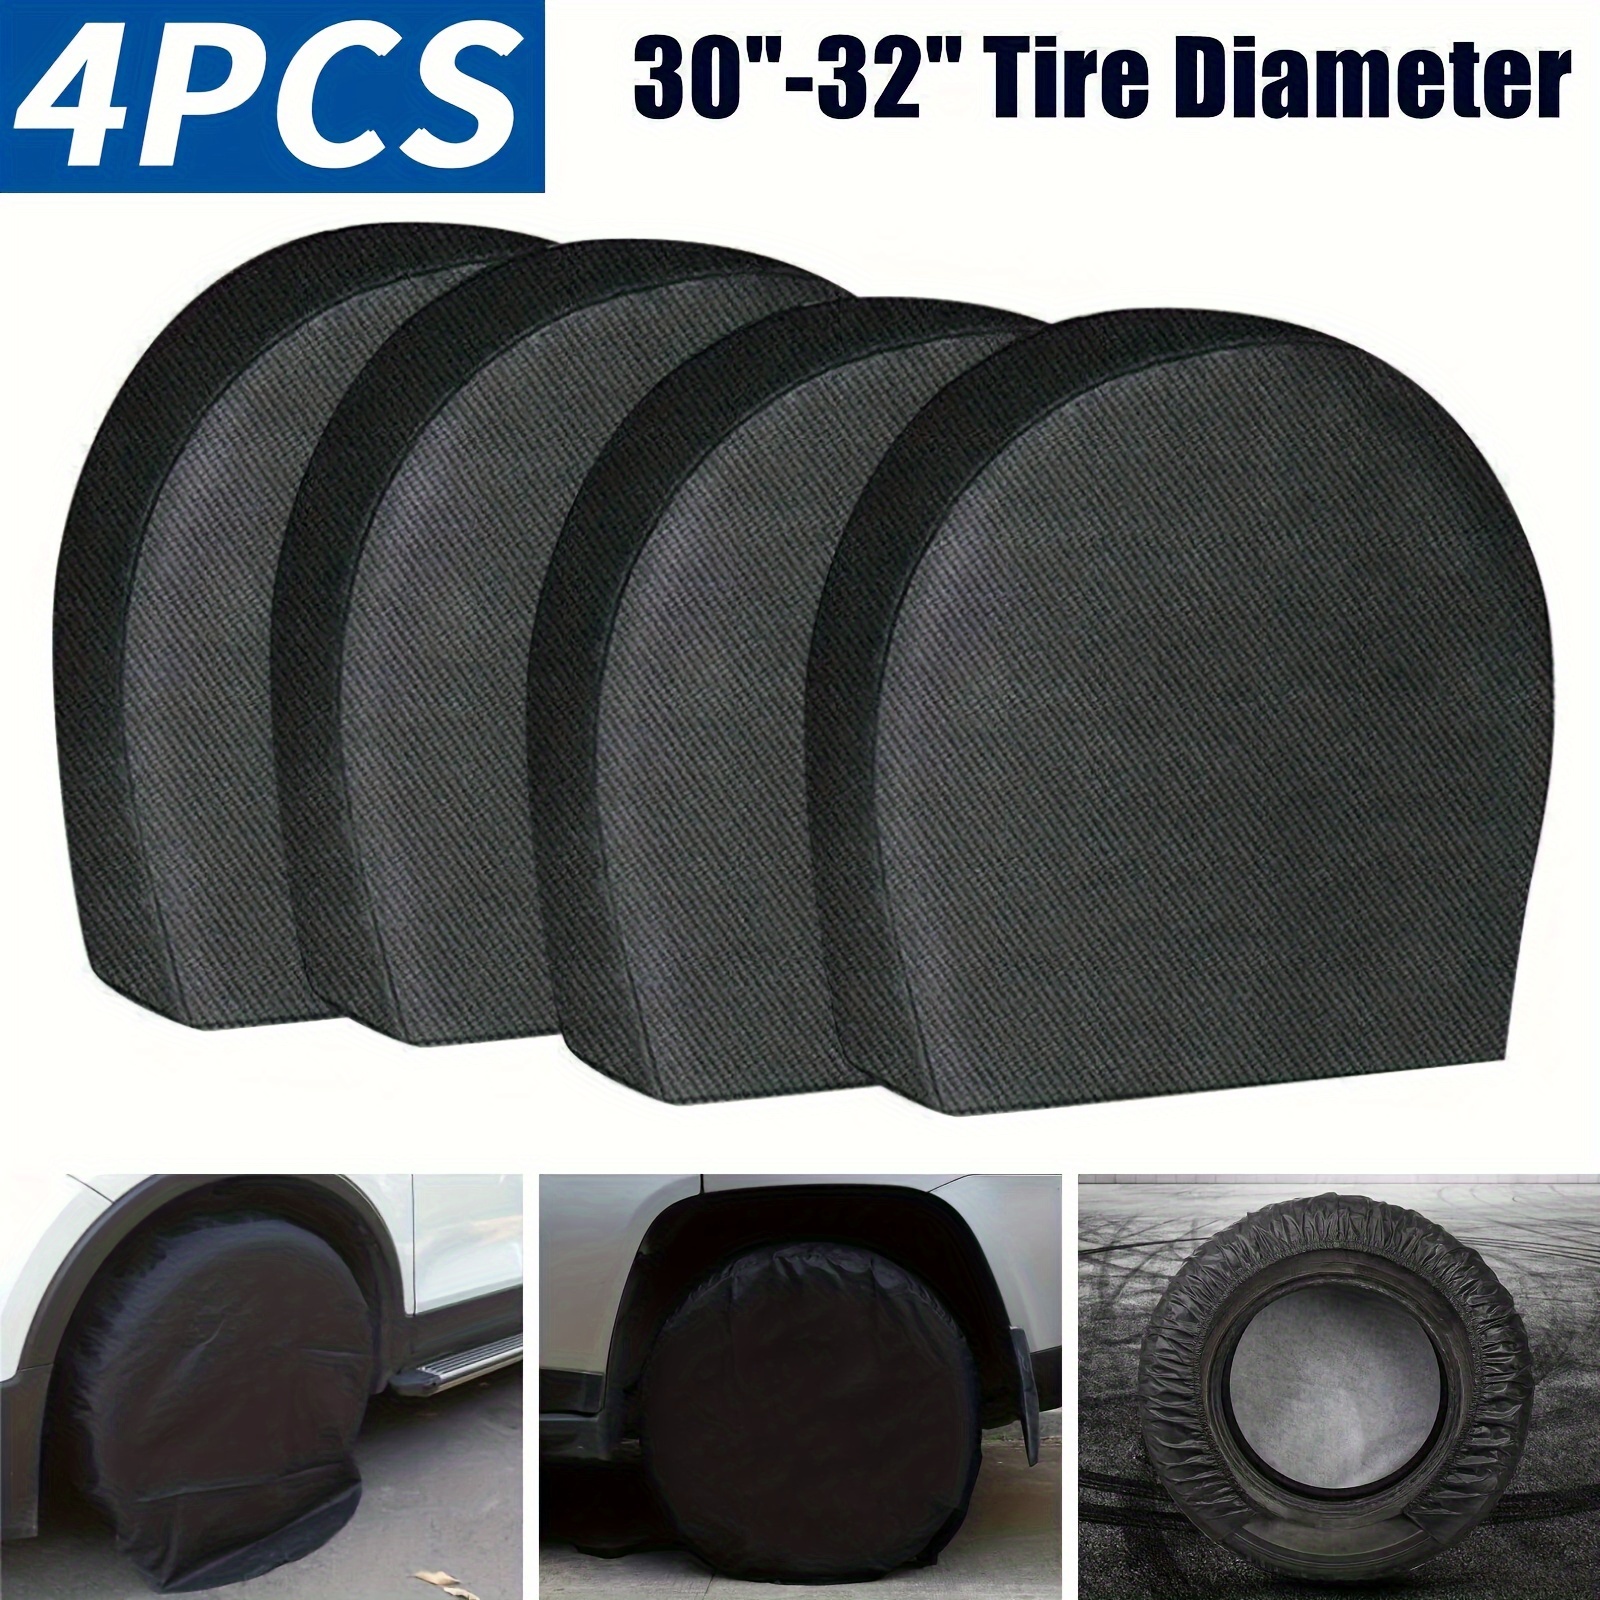 

4pcs Tire Covers, Waterproof Protector Cover Set, Black Fit For 30"- 32" Trucks Trailers Campers Suv Cars Accessories